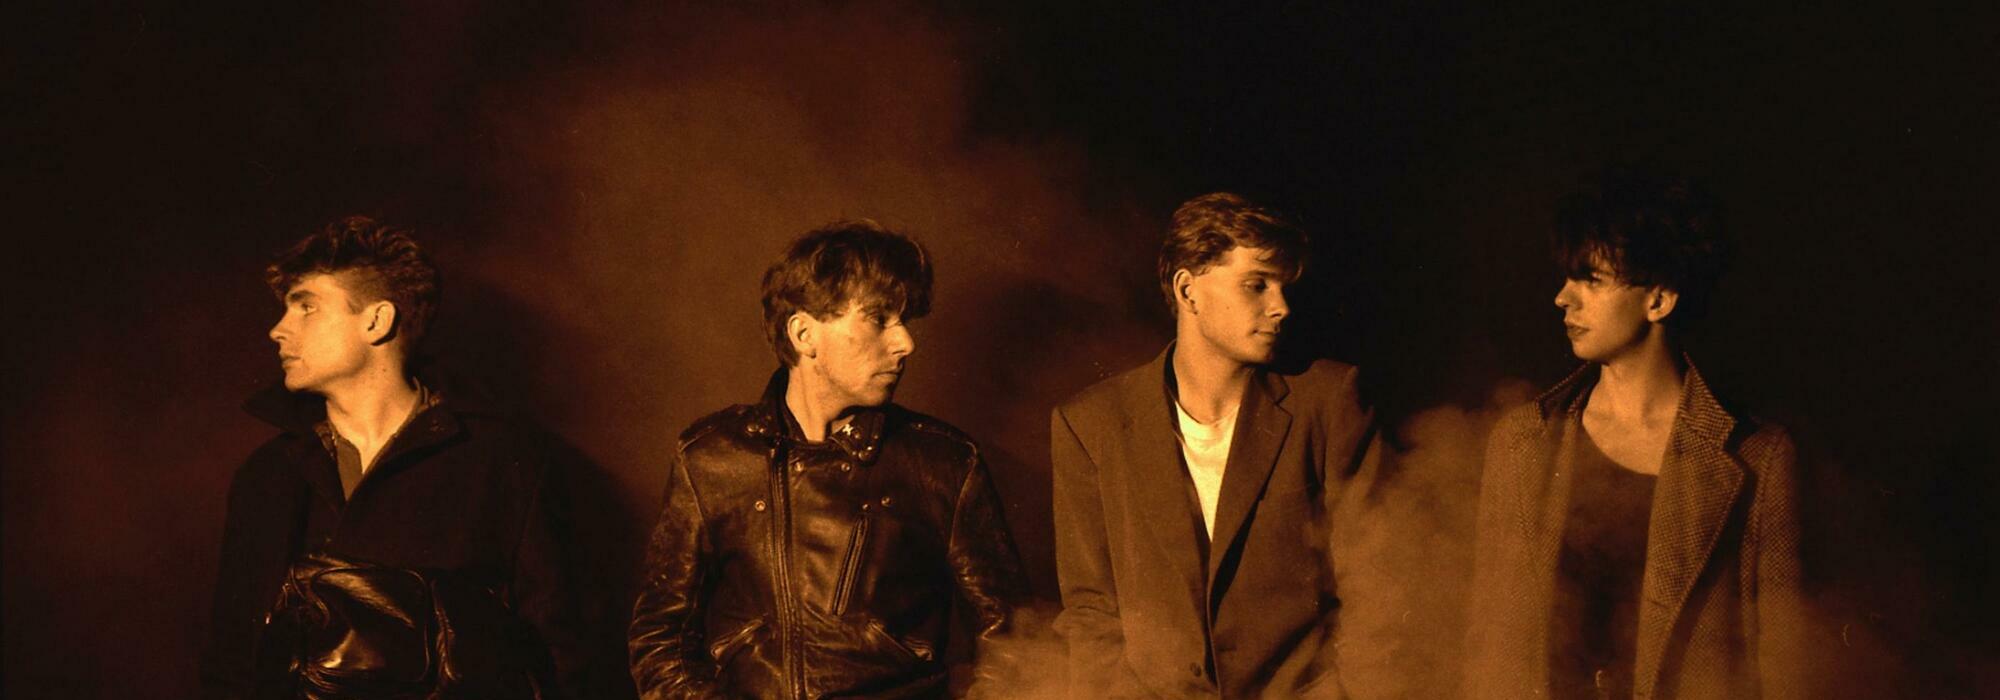 A Echo & The Bunnymen live event